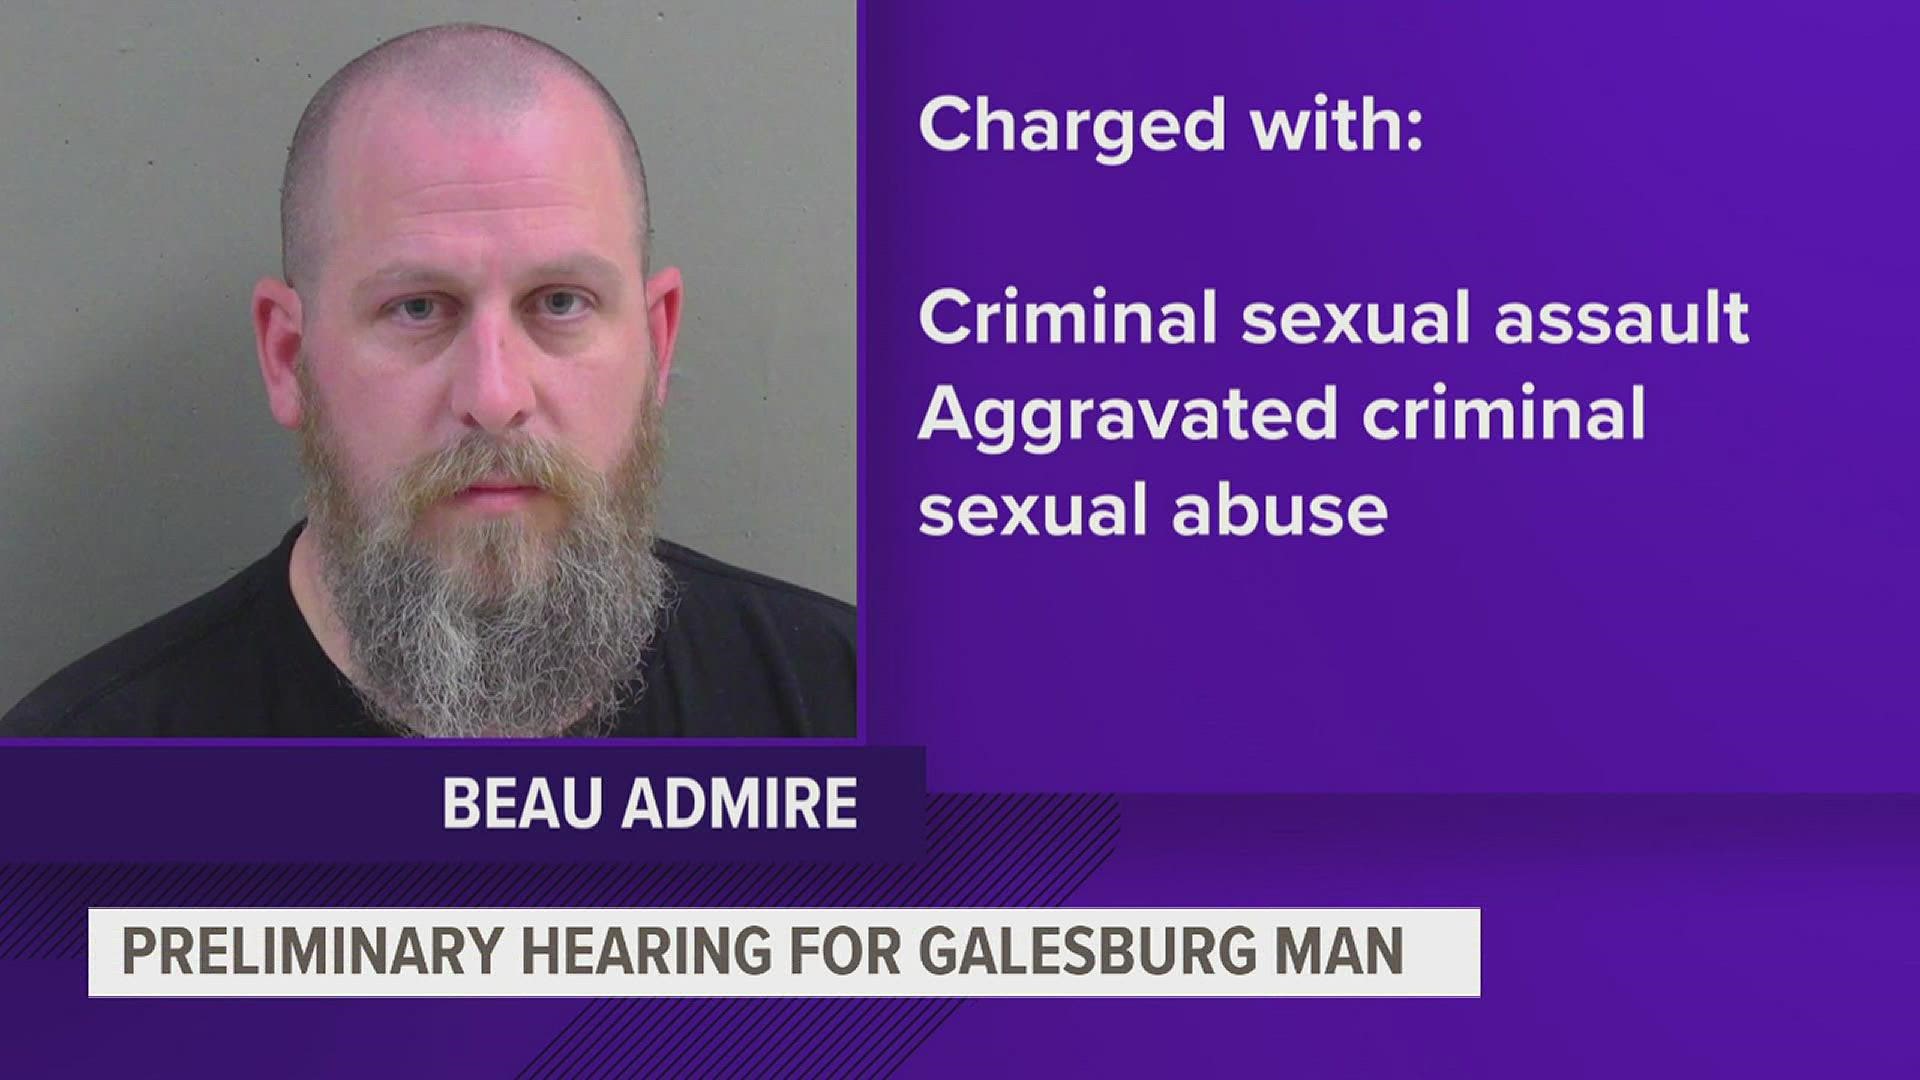 On Nov. 2, Beau W. Admire, 42, was arrested in Knox County for two counts of criminal sexual assault and one count of aggravated criminal sexual abuse.